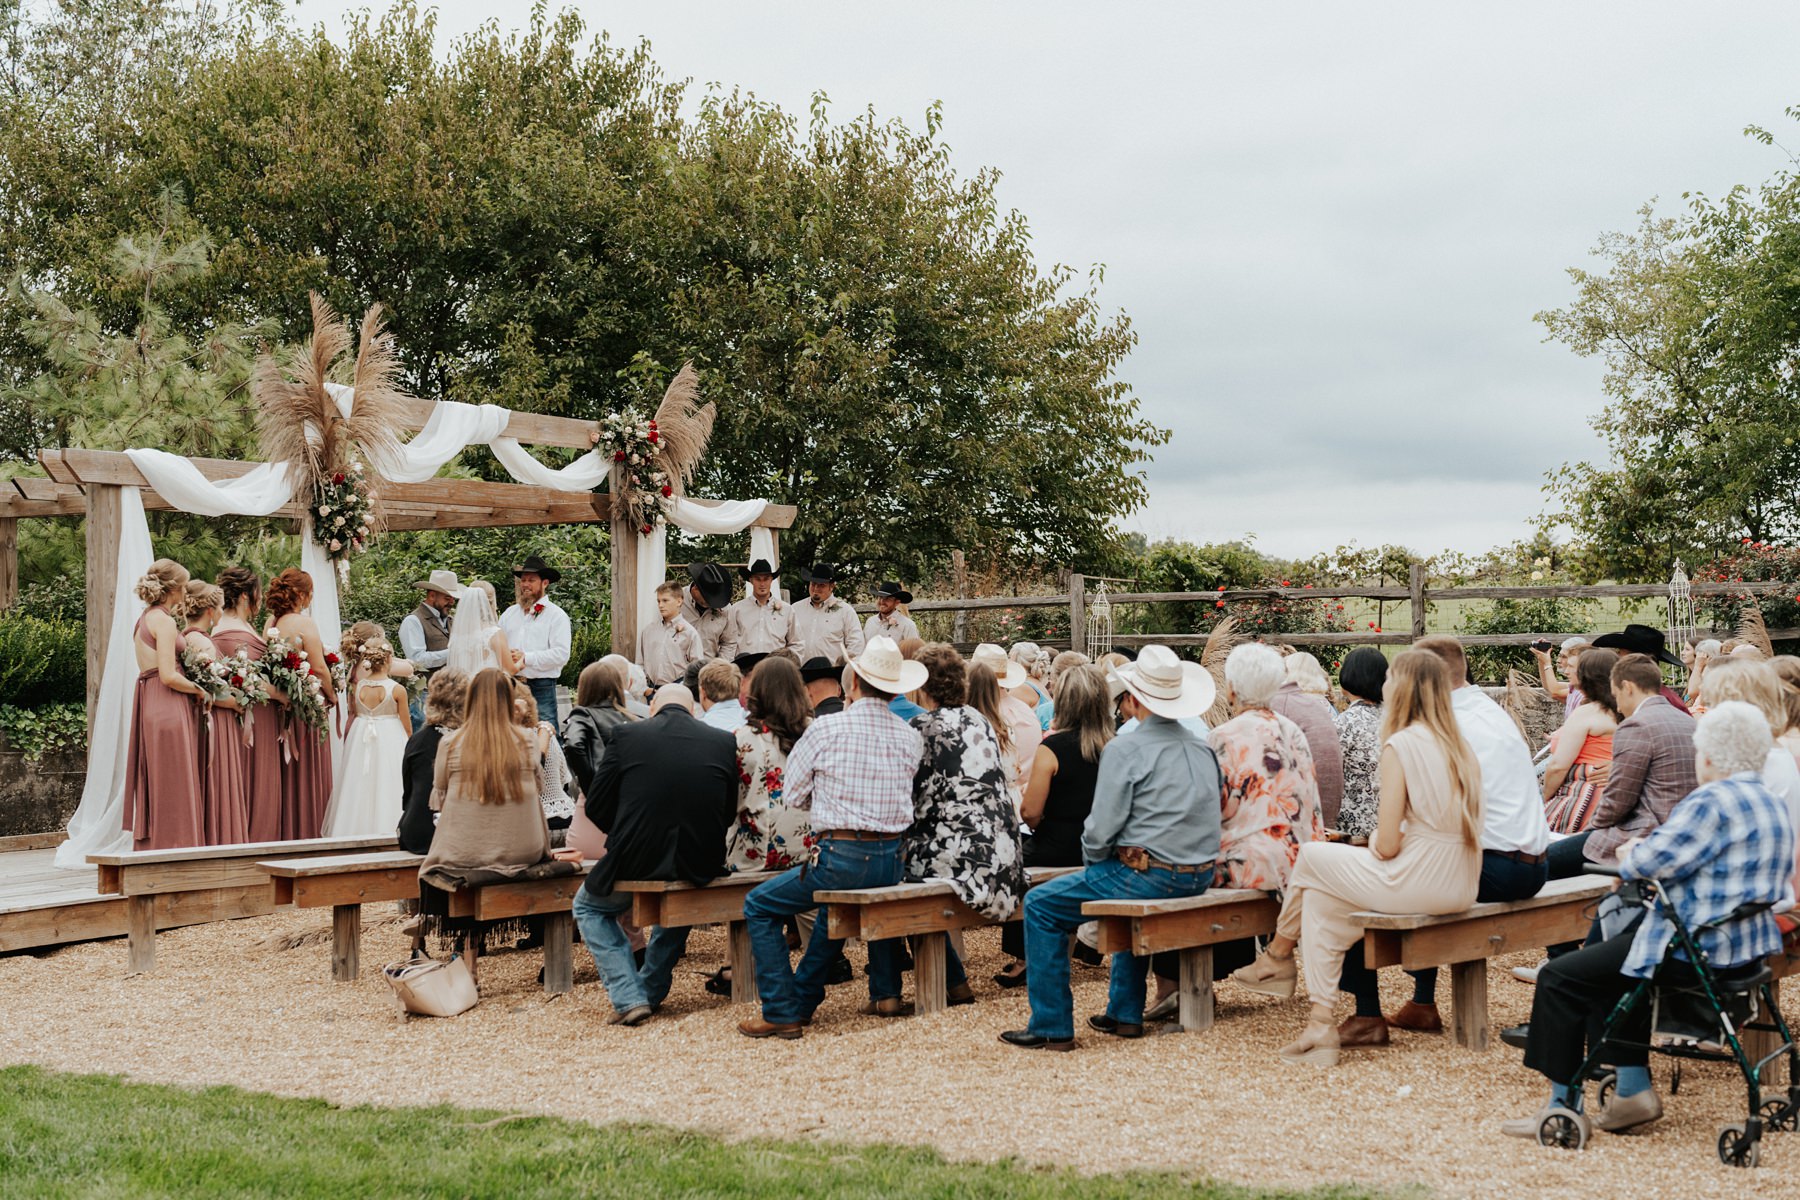 A wedding at The Barn at Belamour in Springfield, MO.